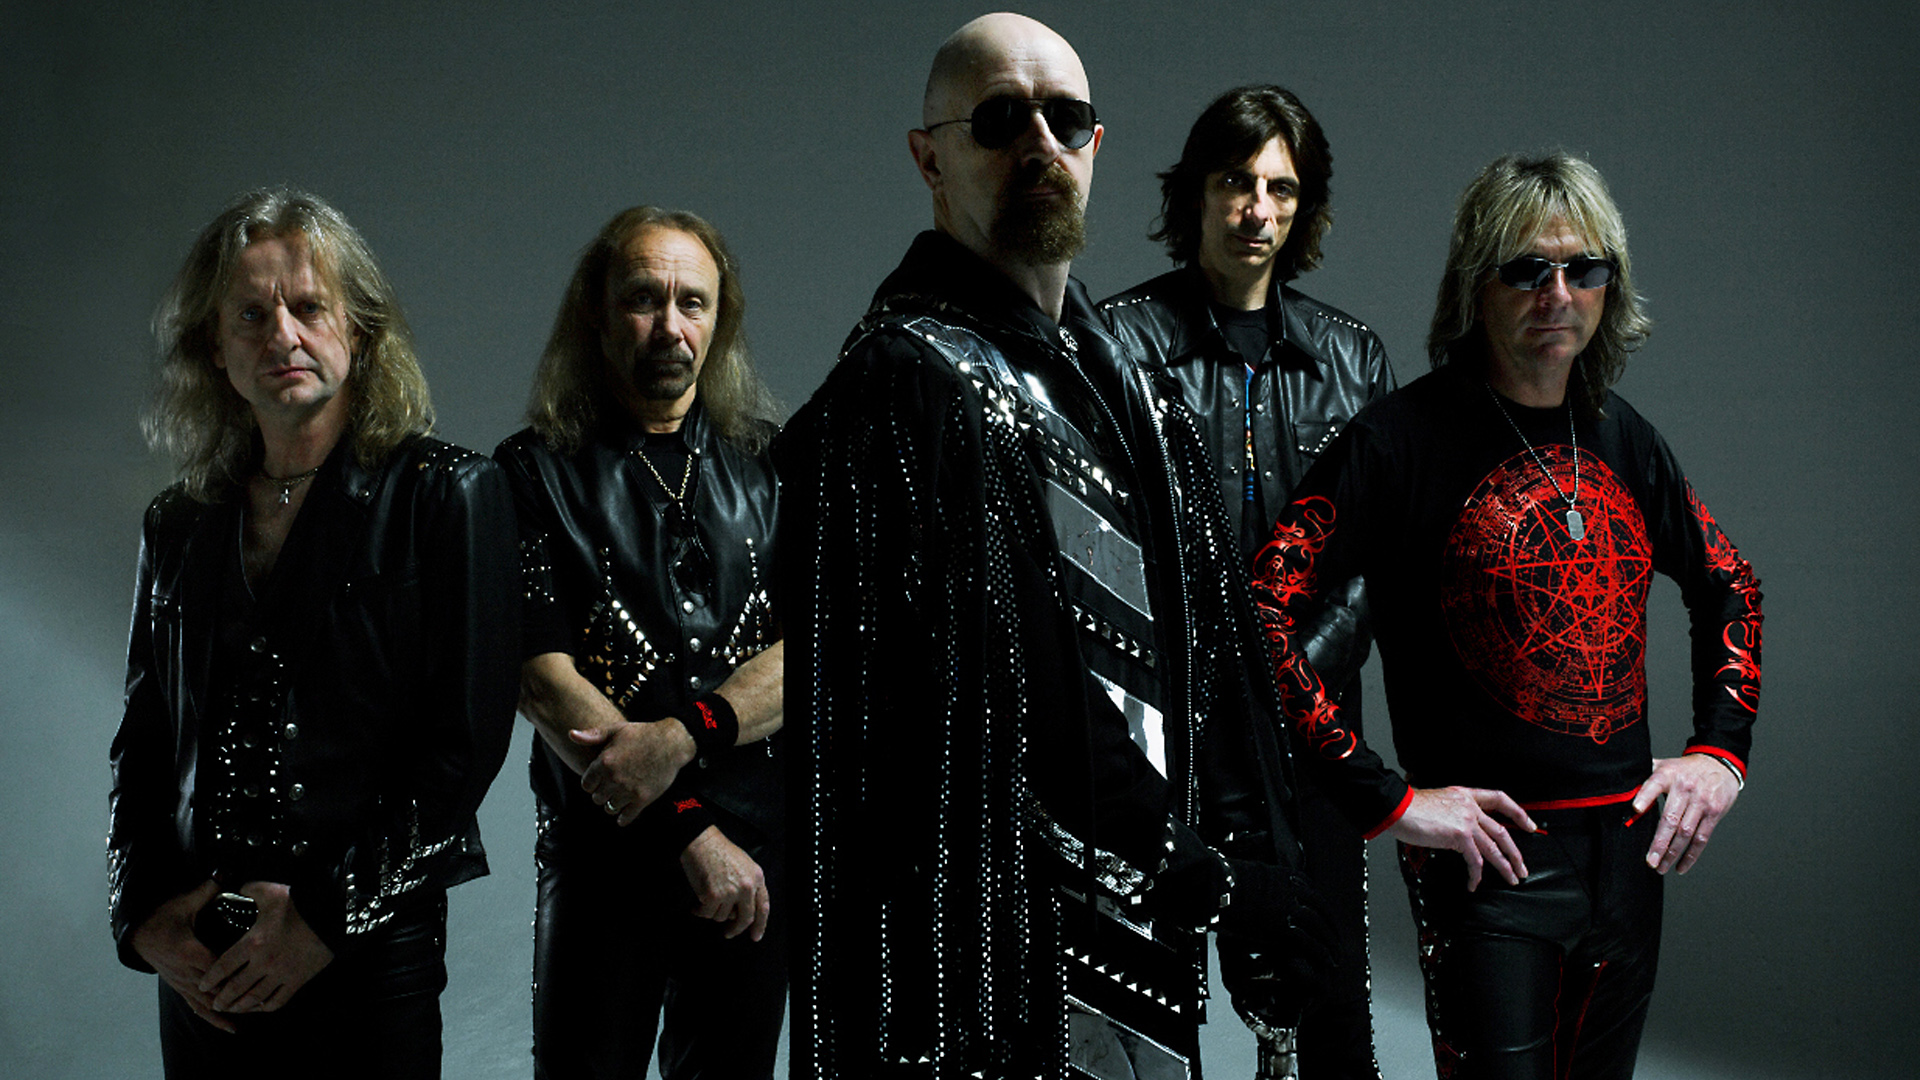 Judas Priest’s Rob Halford “Pissed” That the Band Won’t be Inducted into the Rock & Roll Hall of Fame as Performers